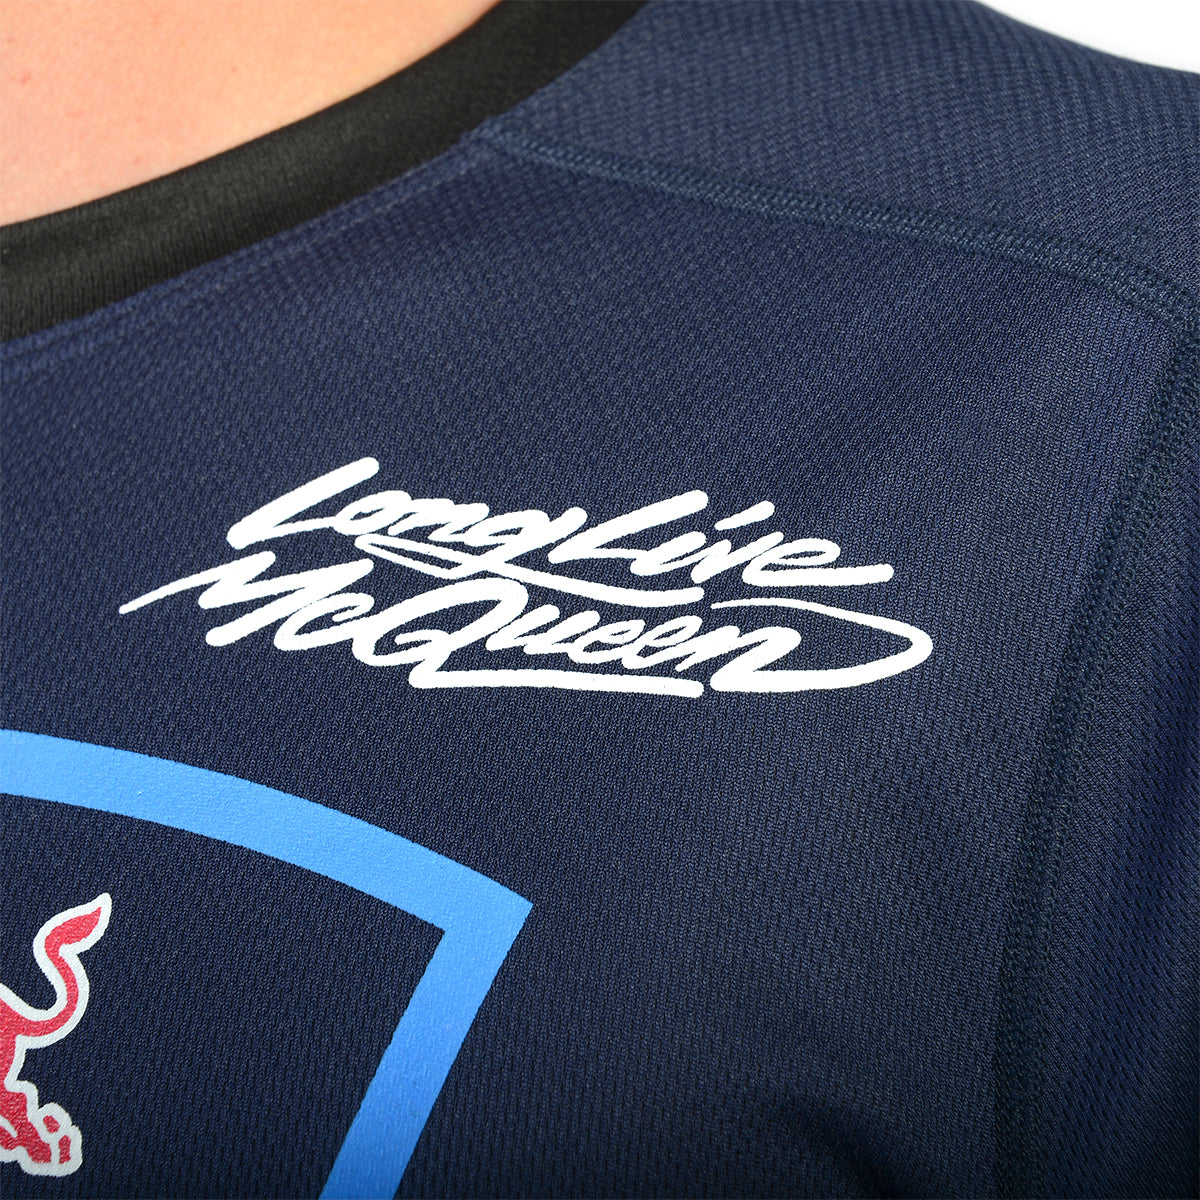 Red Bull Day In The Dirt Down South '22 Jersey - Navy/Blue